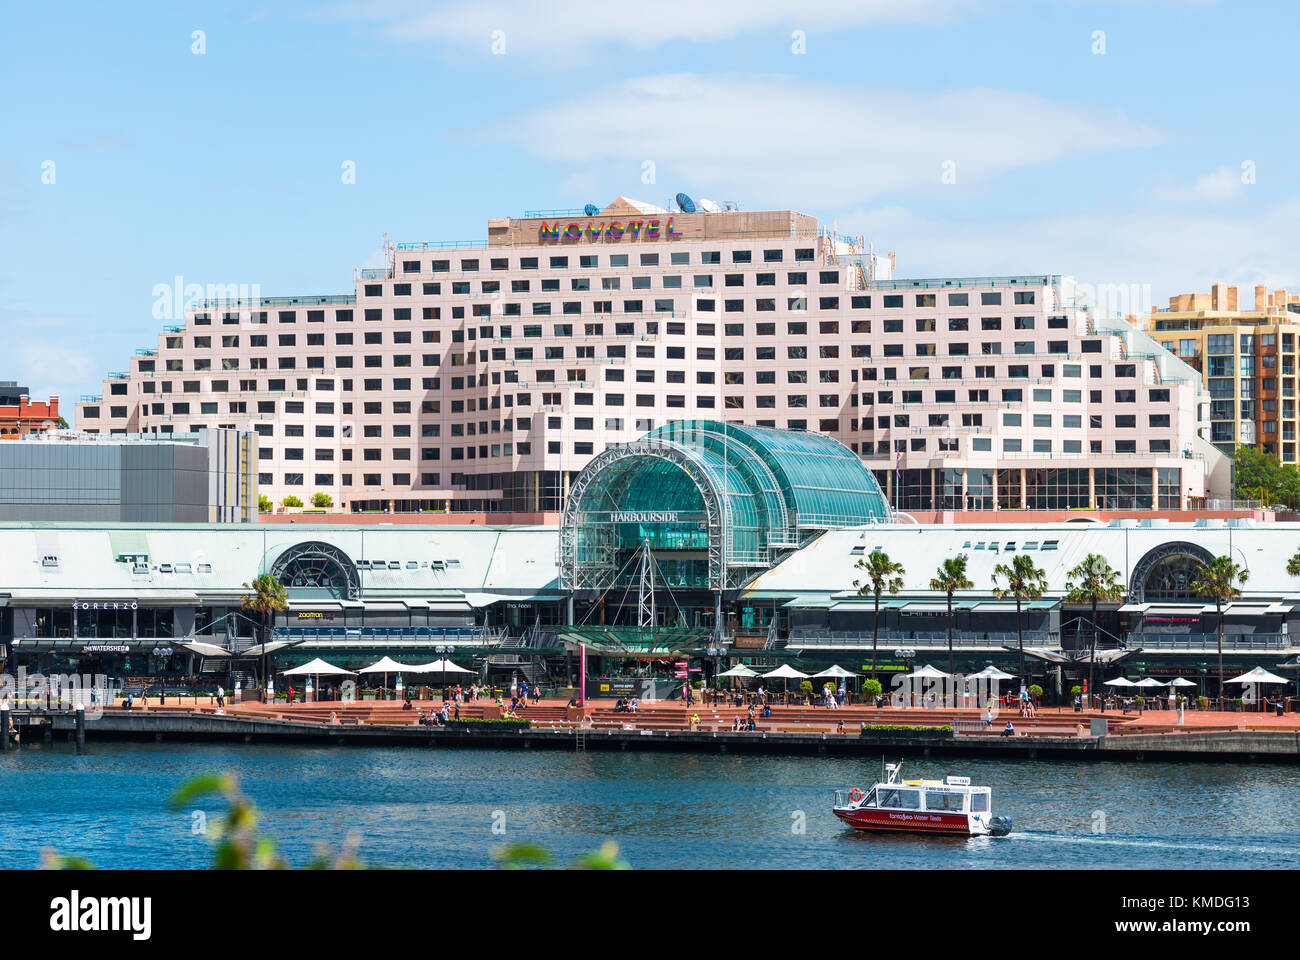 The Novotel Hotel stands above the Harbourside shopping & restaurant complex on Darling Harbour, Sydney, New South Wales, Australia. Stock Photo